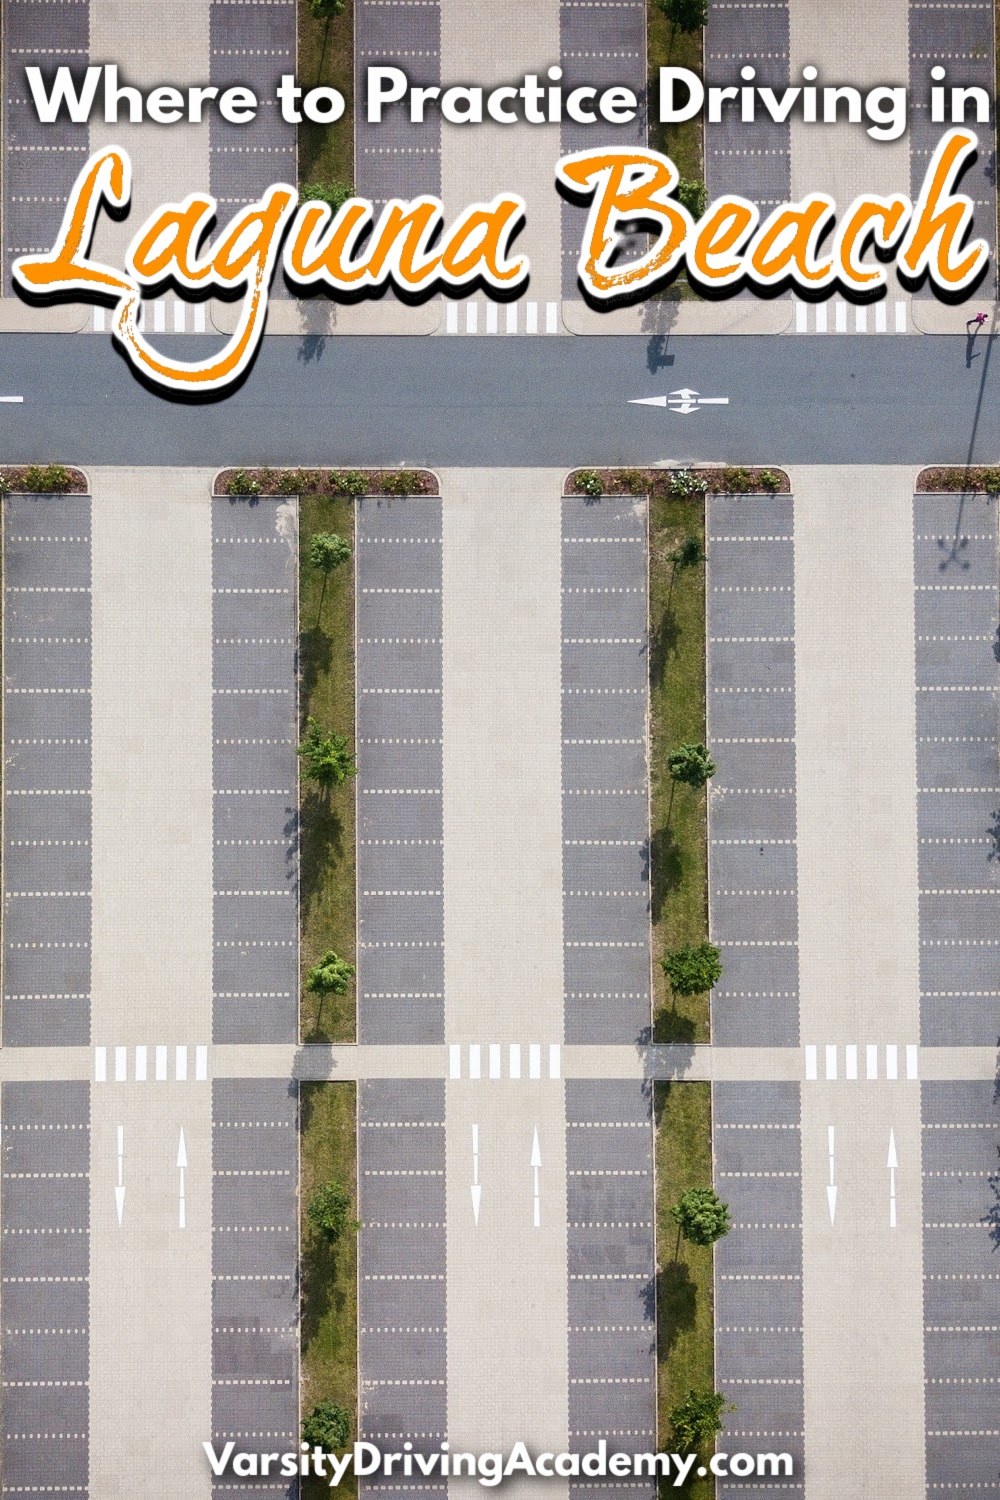 Knowing where to practice driving in Laguna Beach is especially important for inexperienced drivers and student drivers alike.